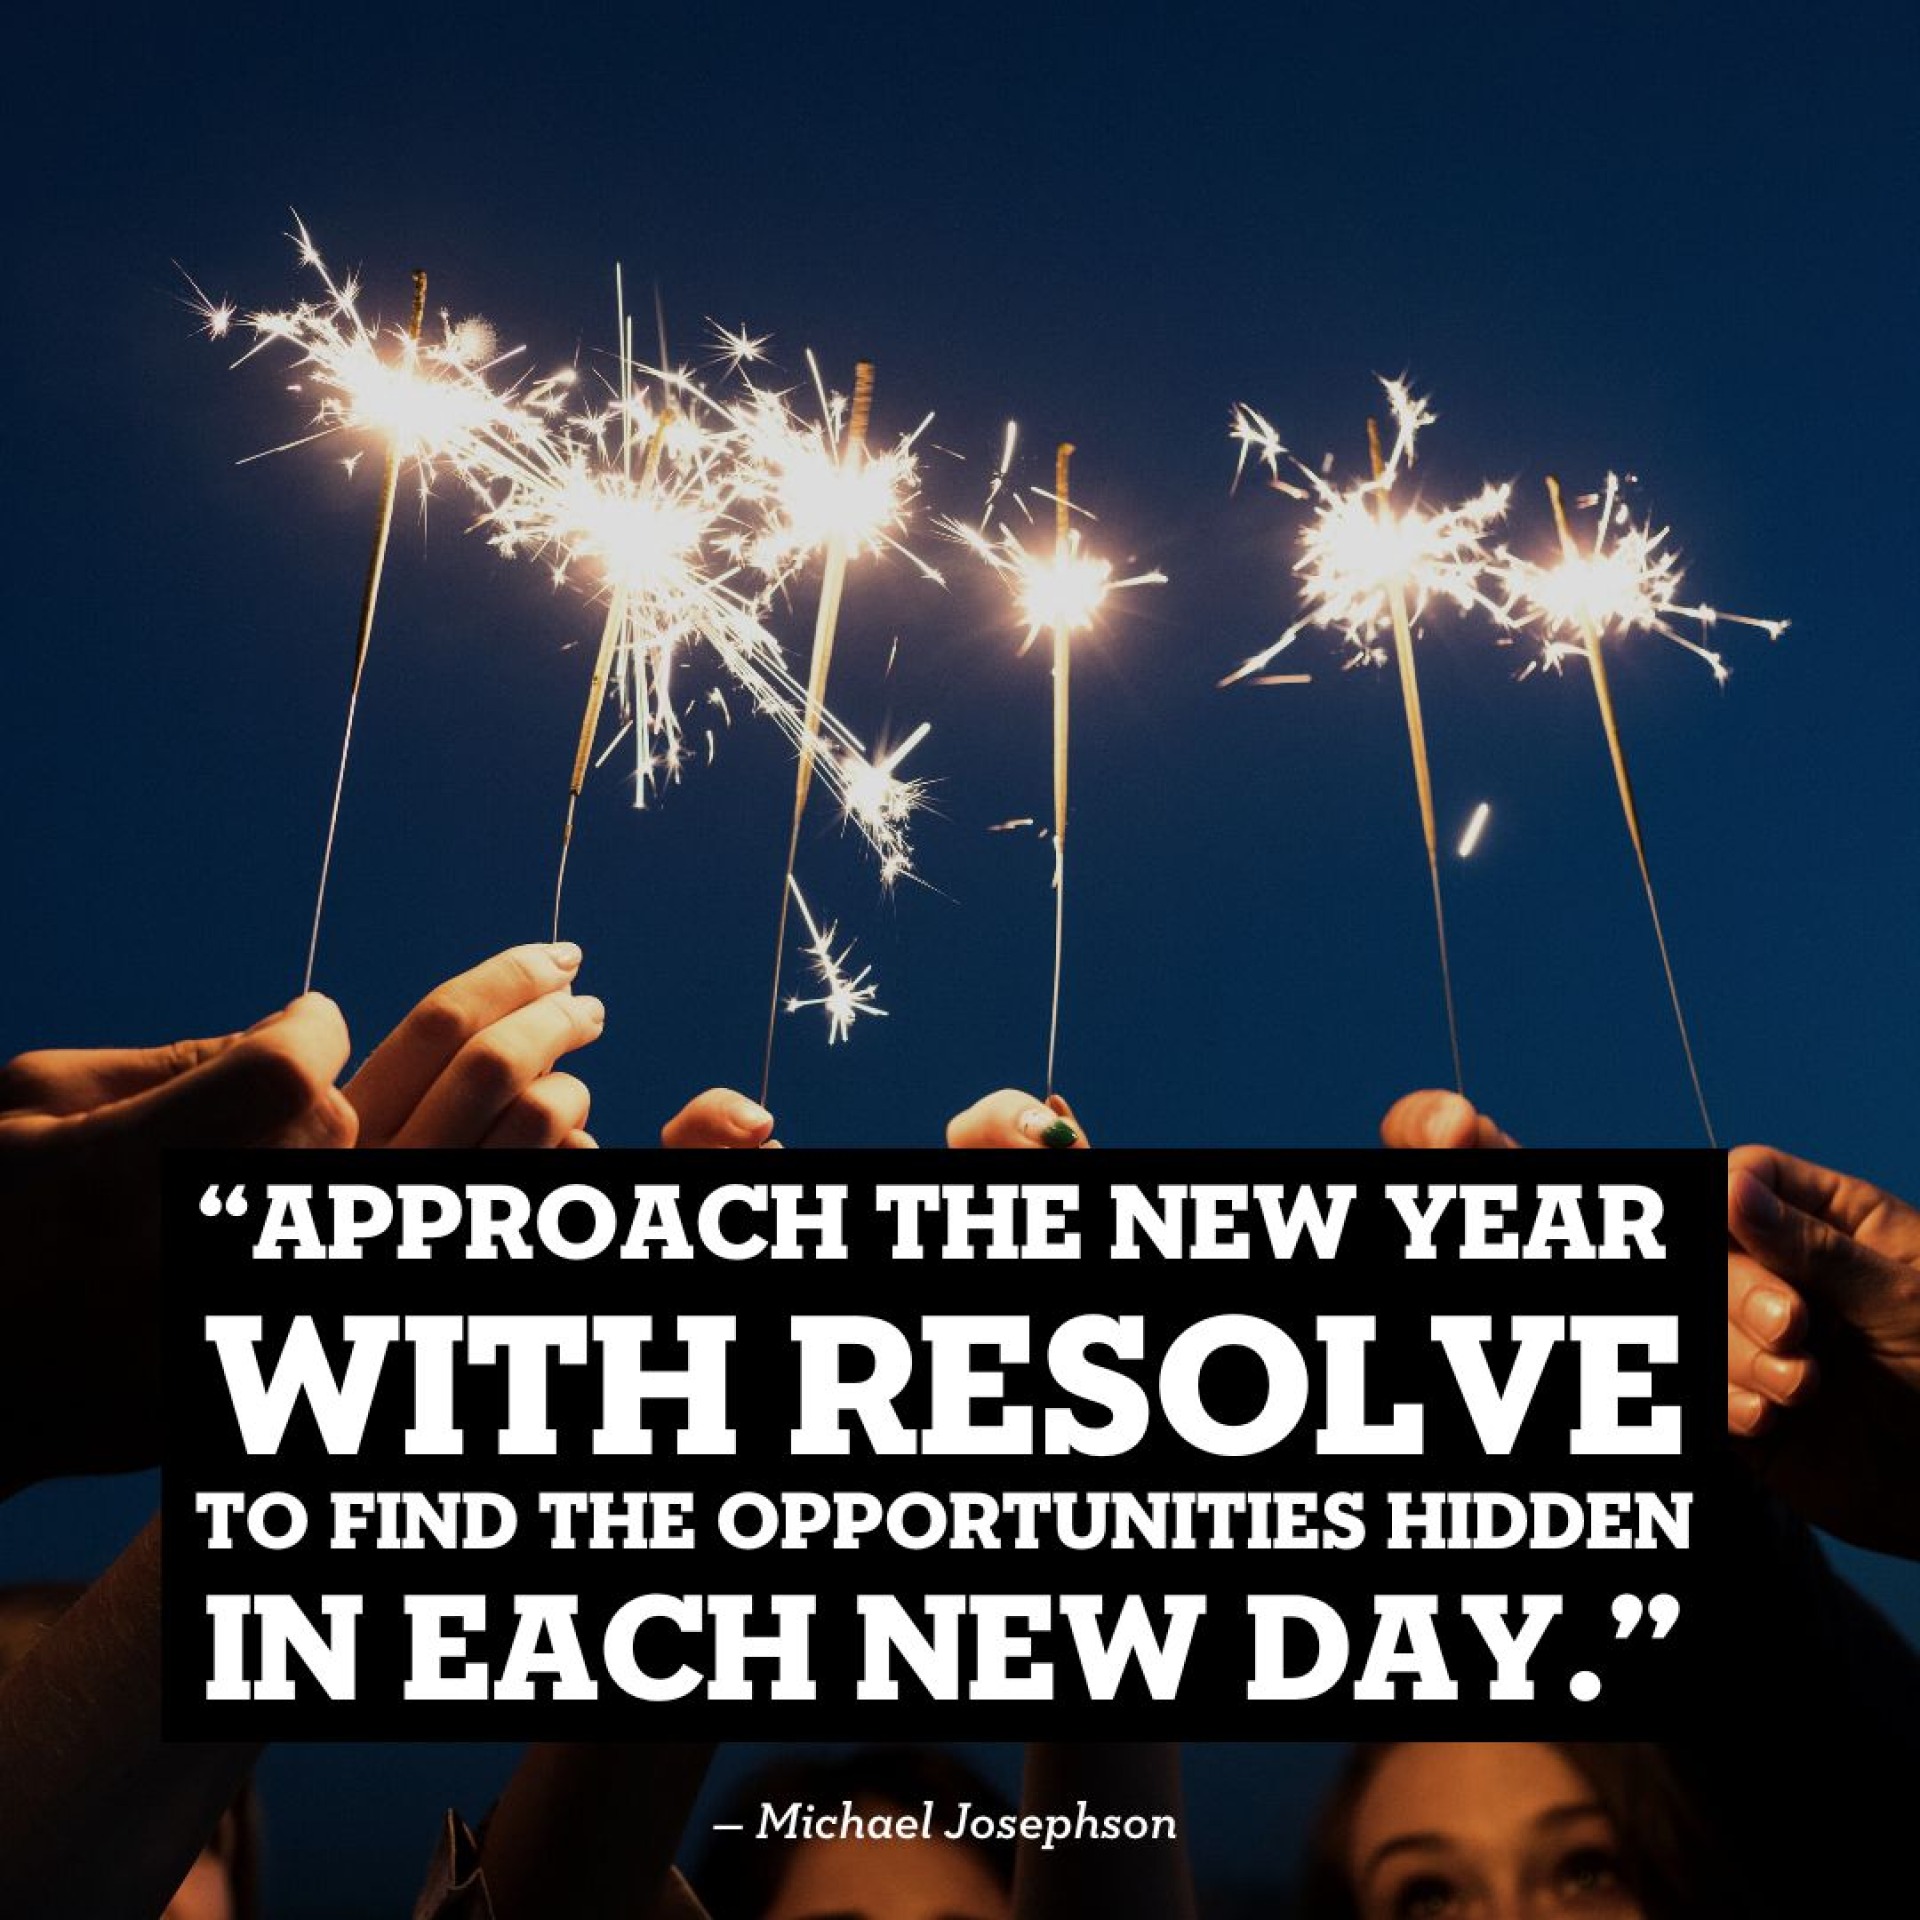 Approach the new year with resolve to find the opportunities hidden in each new day. Michael Josephson.